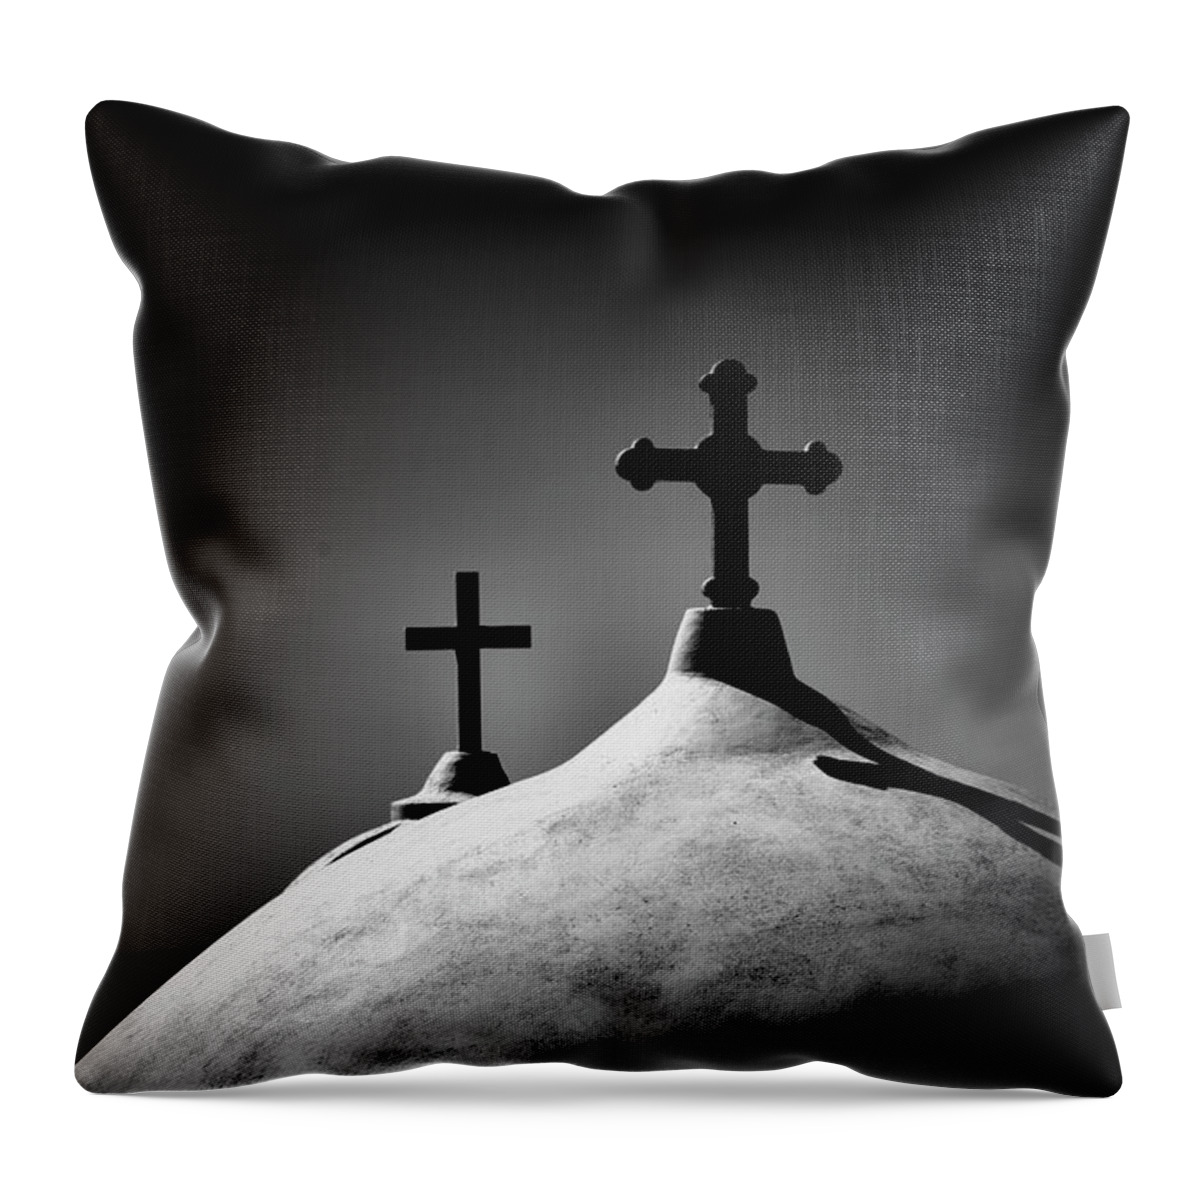 Europe Throw Pillow featuring the photograph Show me the path. by Usha Peddamatham